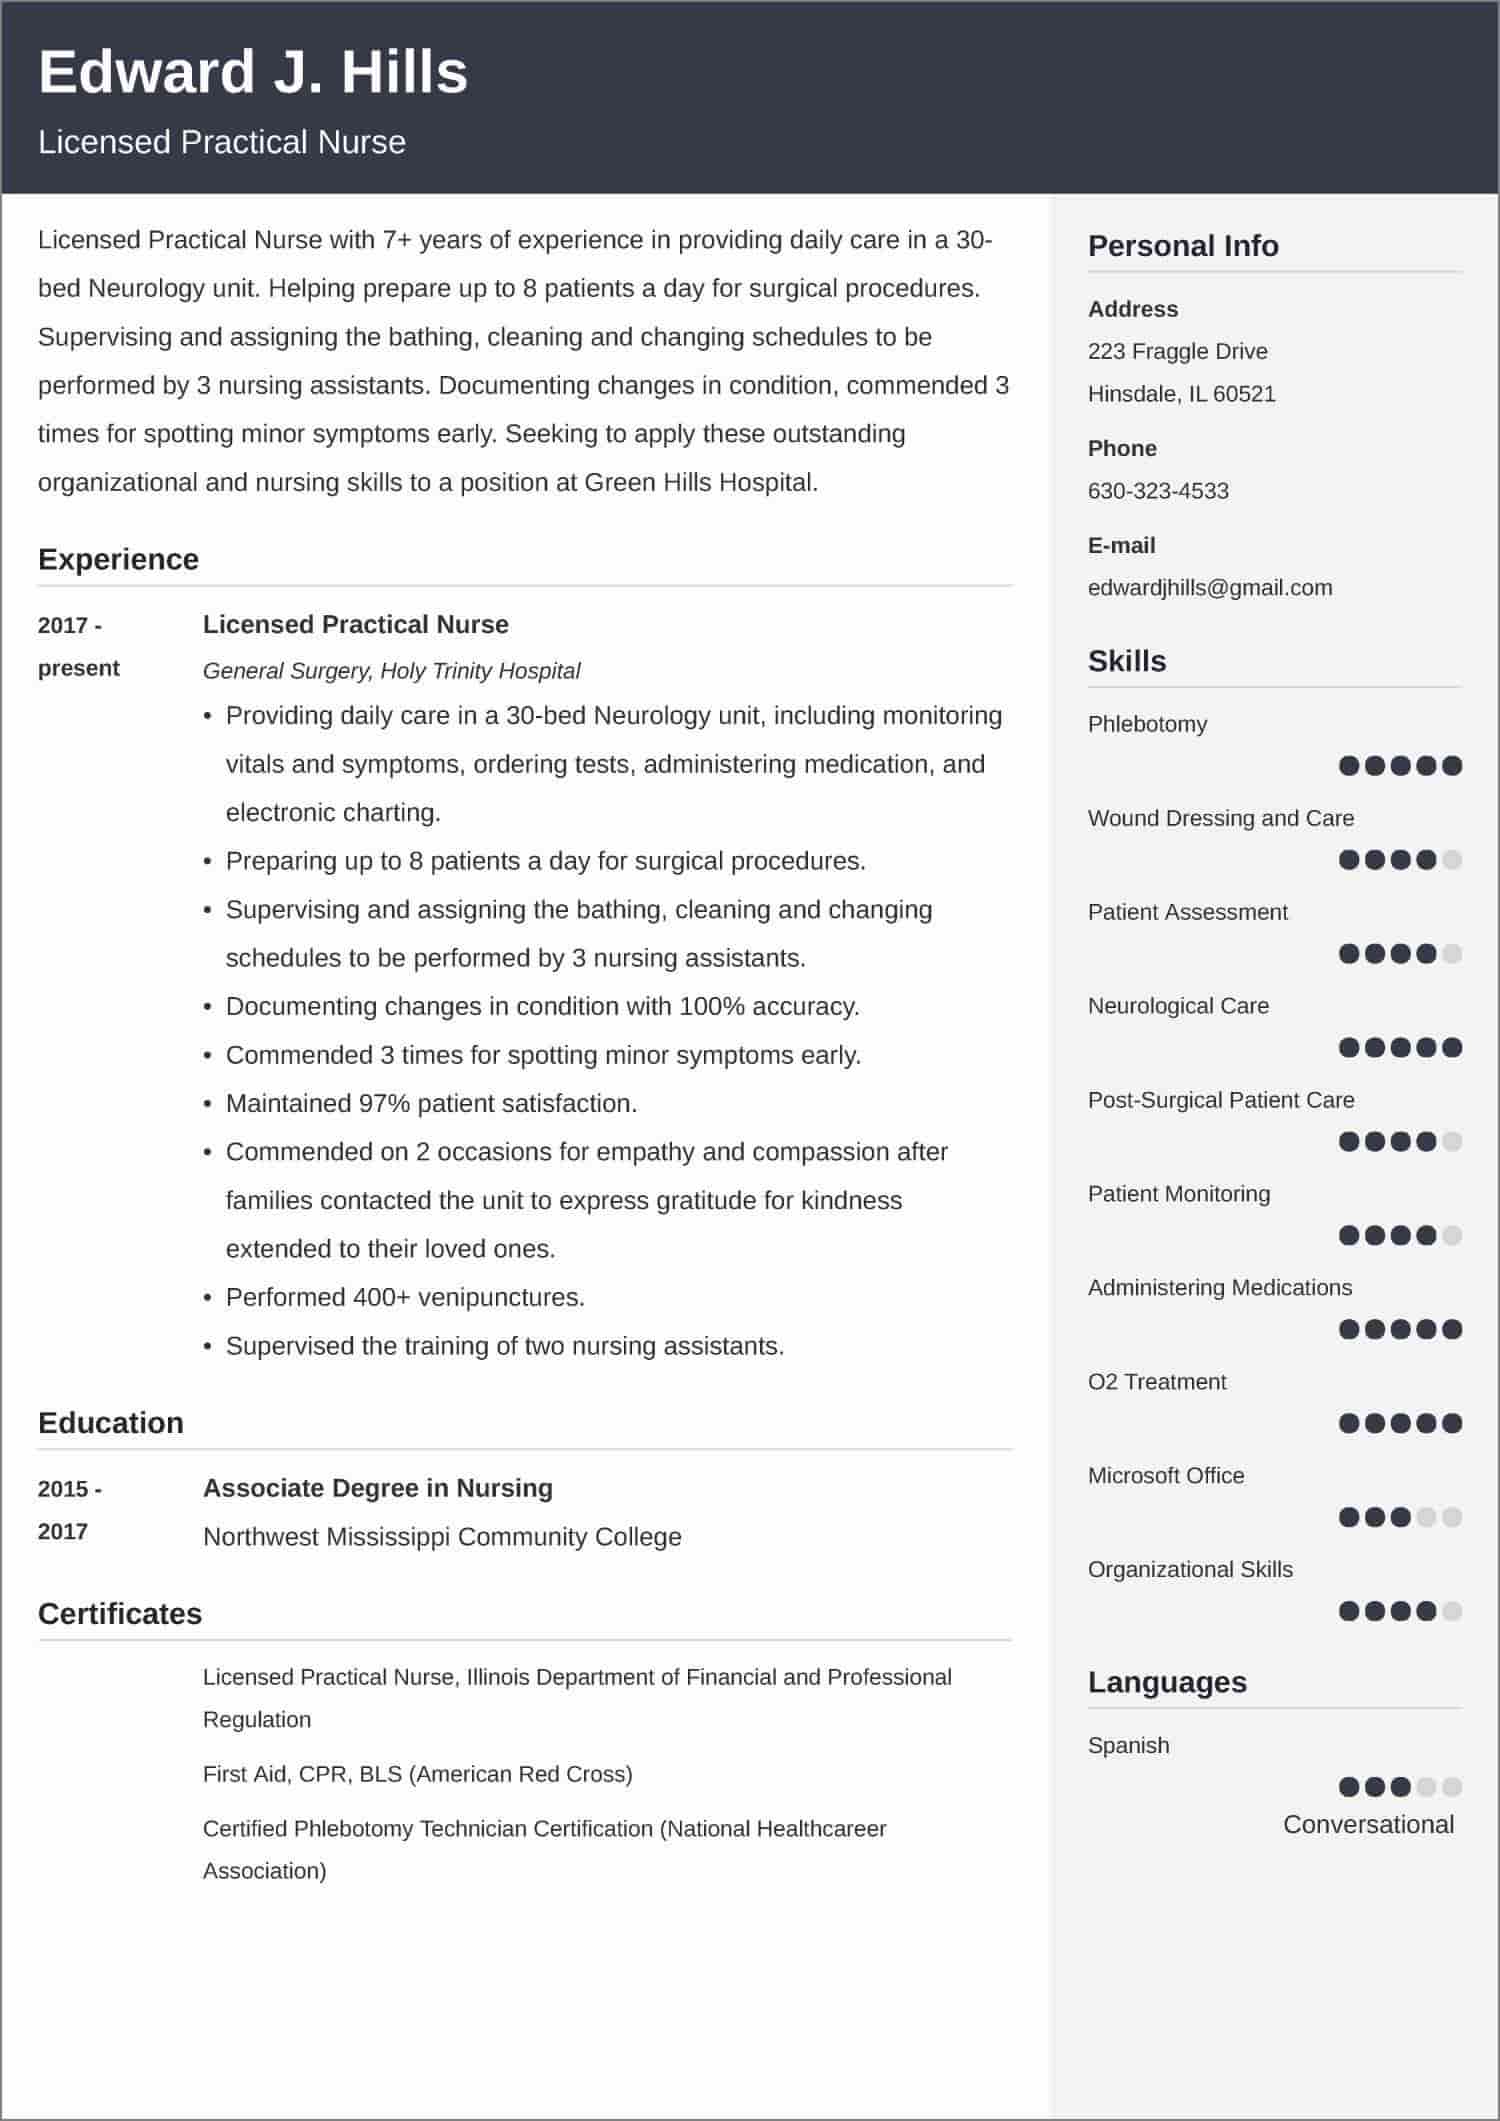 LPN Resume Example & LPN Skills for a Resume + Writing Tips